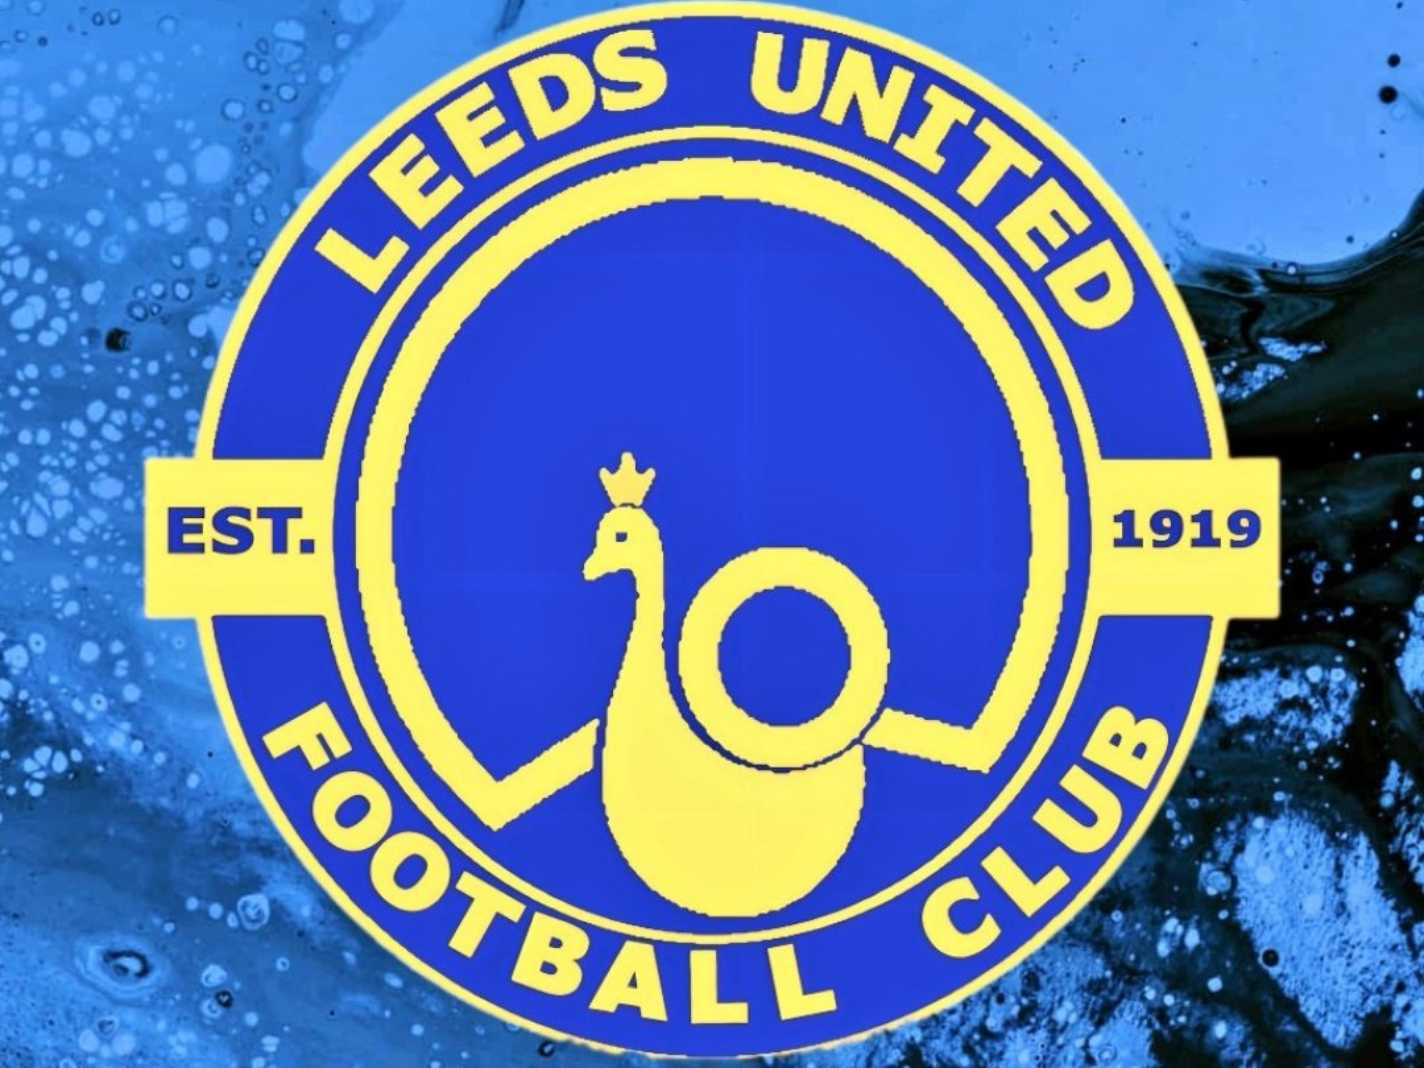 Gossip: Could Leeds United Return to a Peacock Crest Once More?